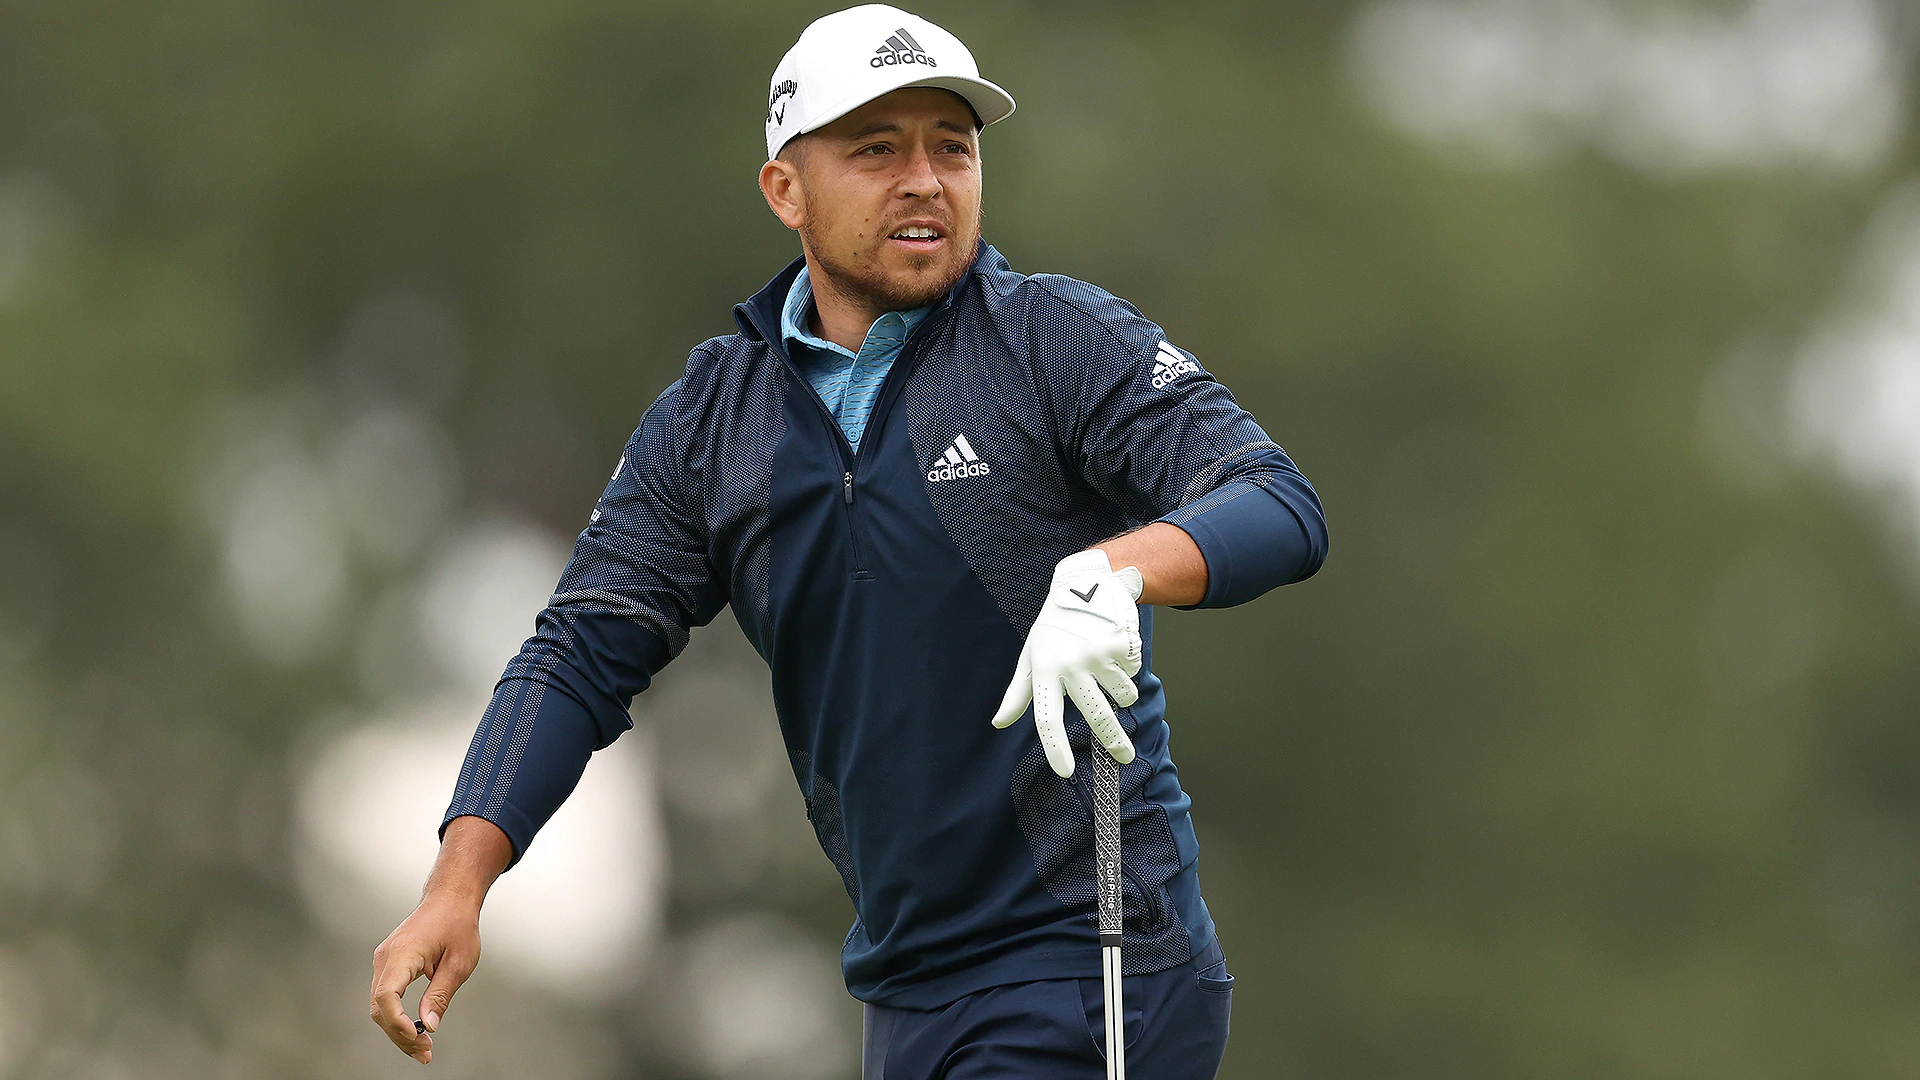 Too easy for a U.S. Open? Xander Schauffele: 'I played my a-- off' 2